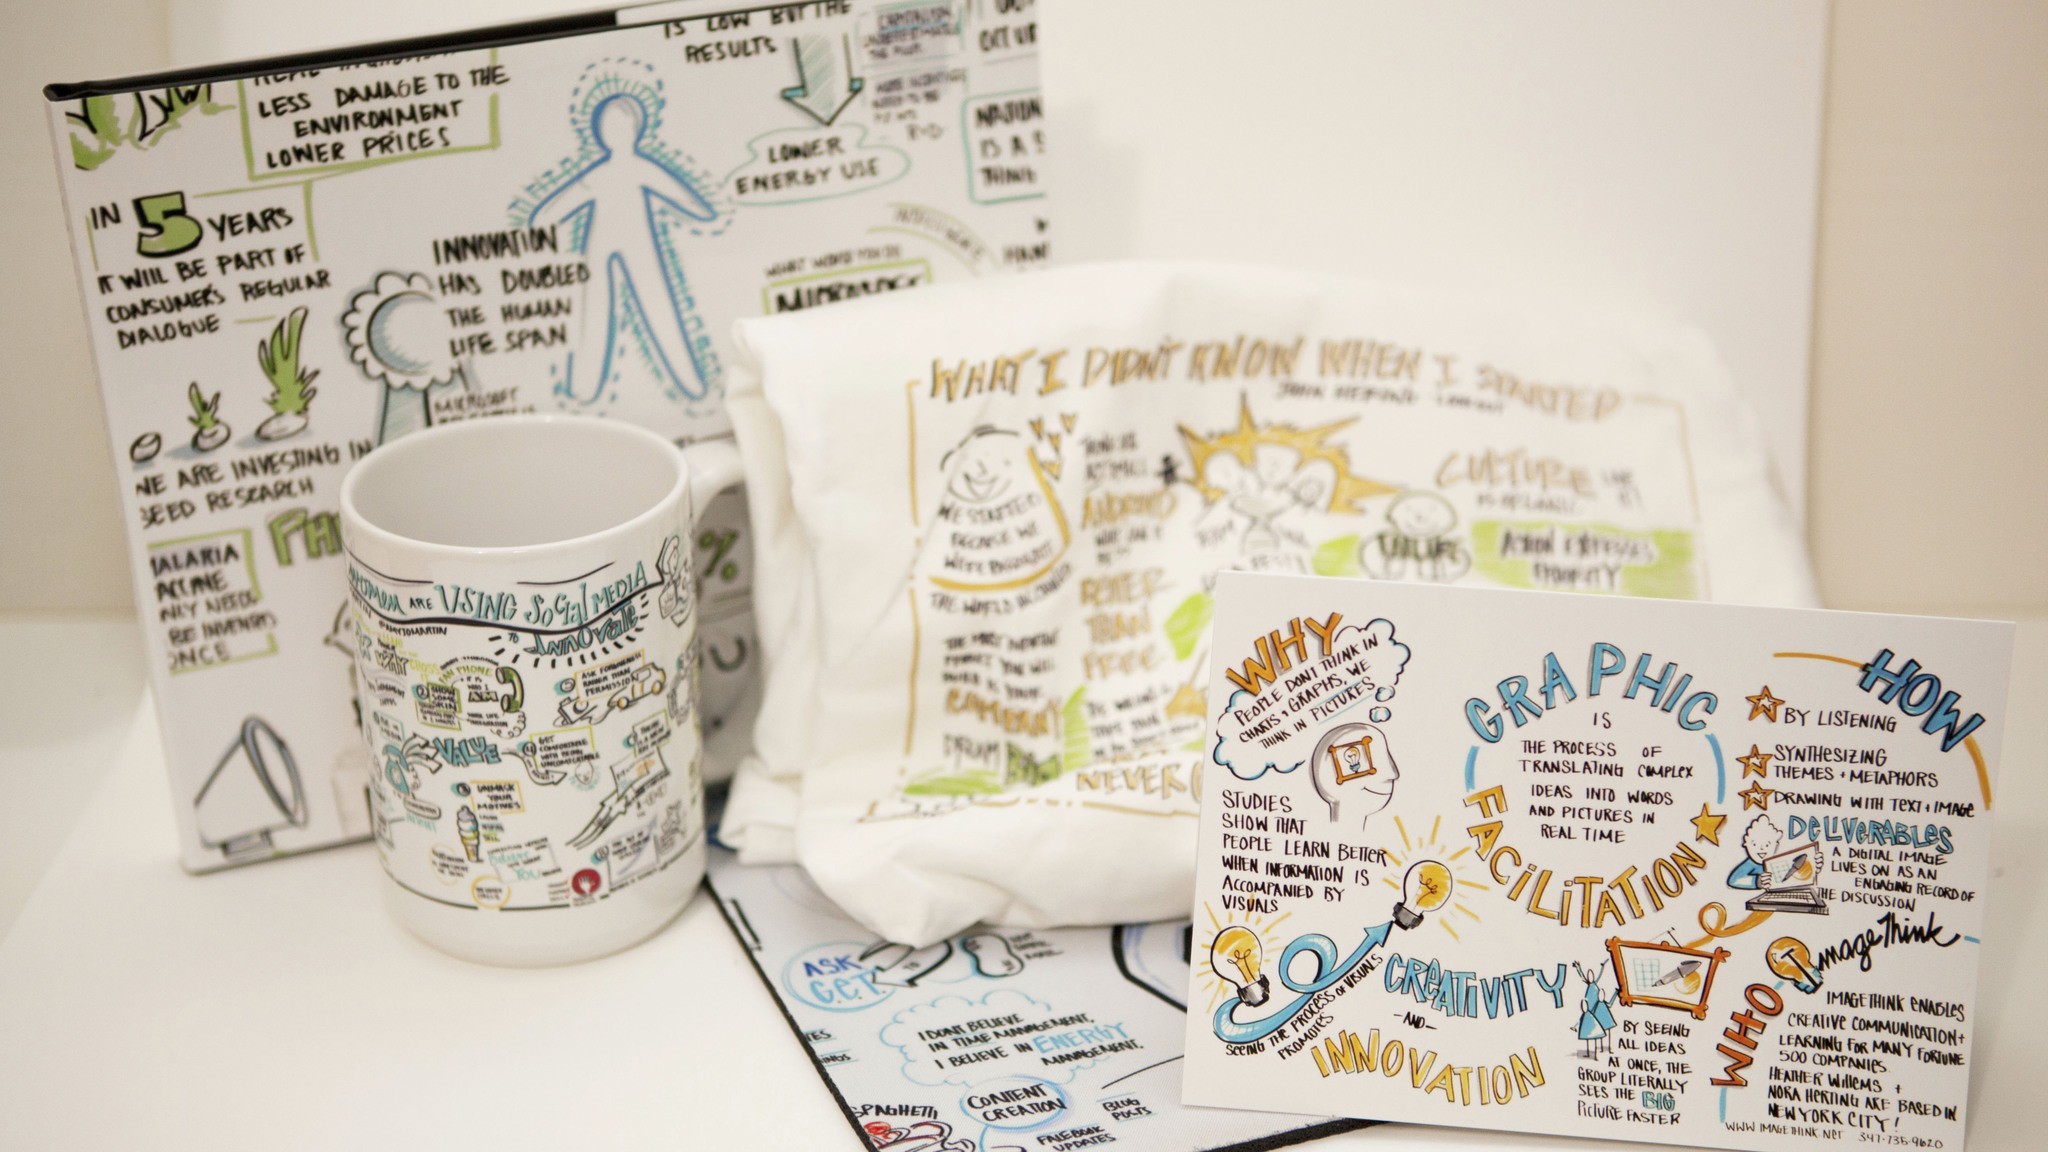 Printed materials repurpose artwork created by ImageThink into gifts like mugs, portraits, and tee shirts.